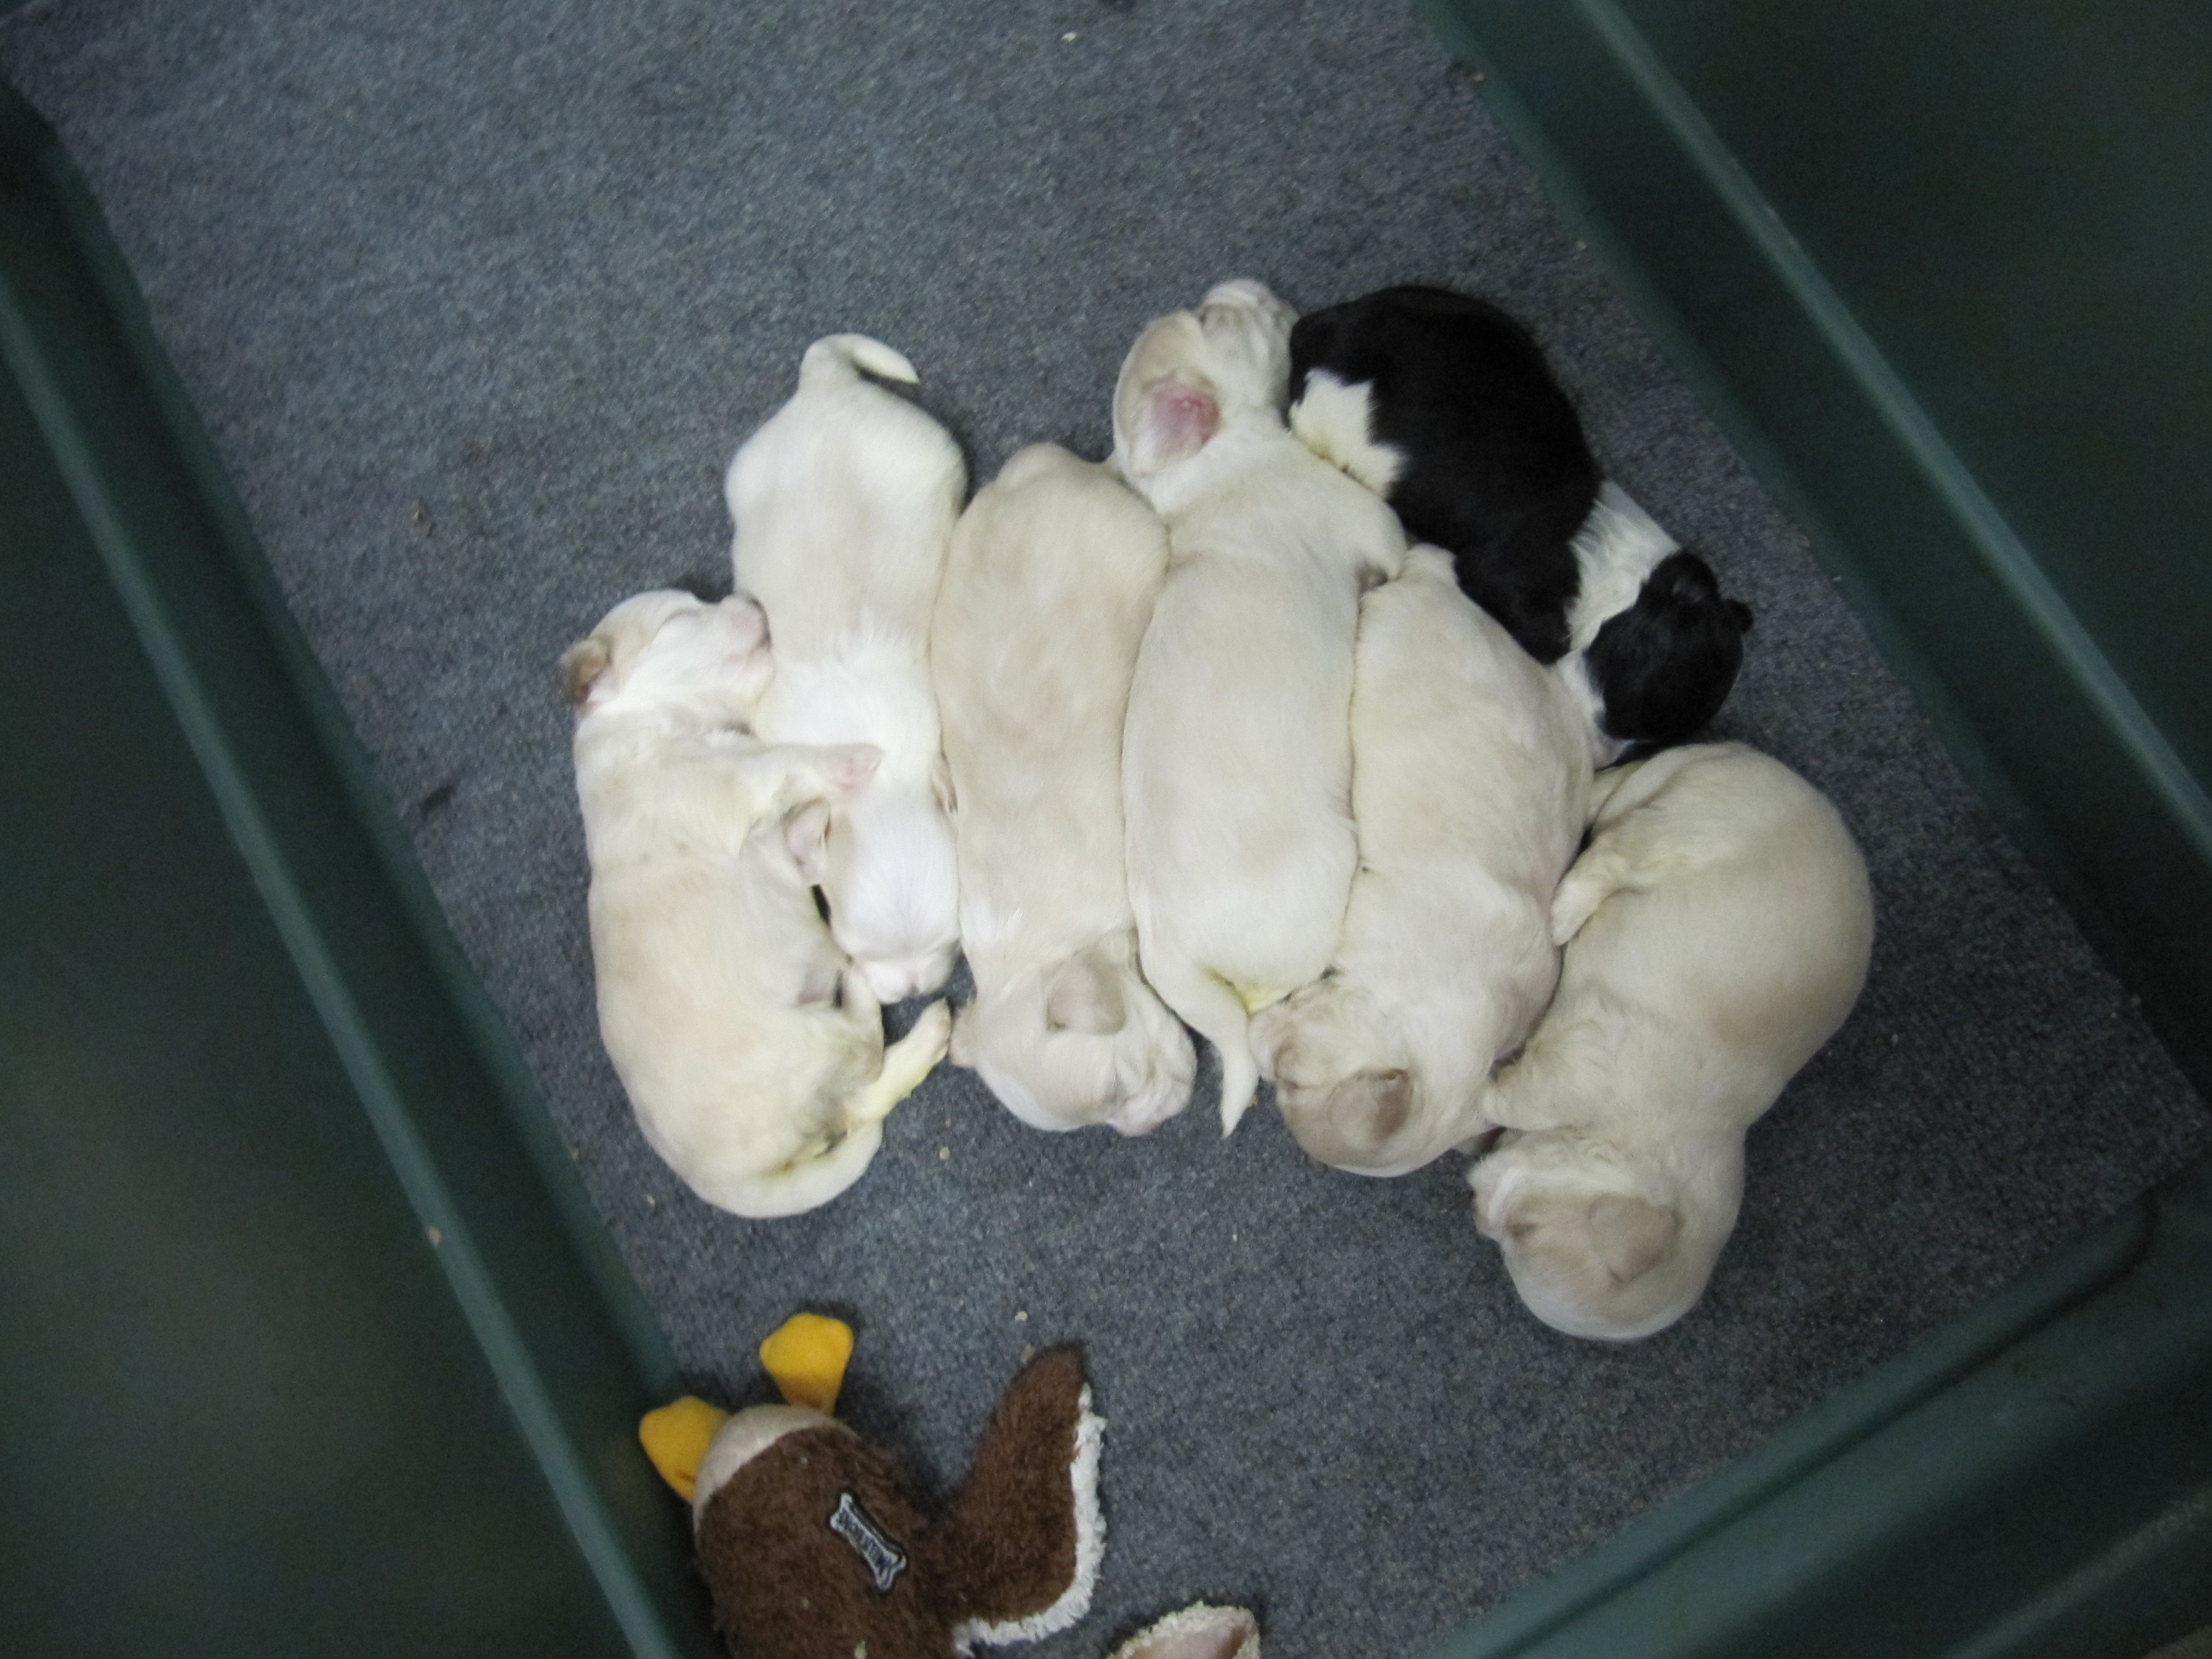 seven puppies sleeping together